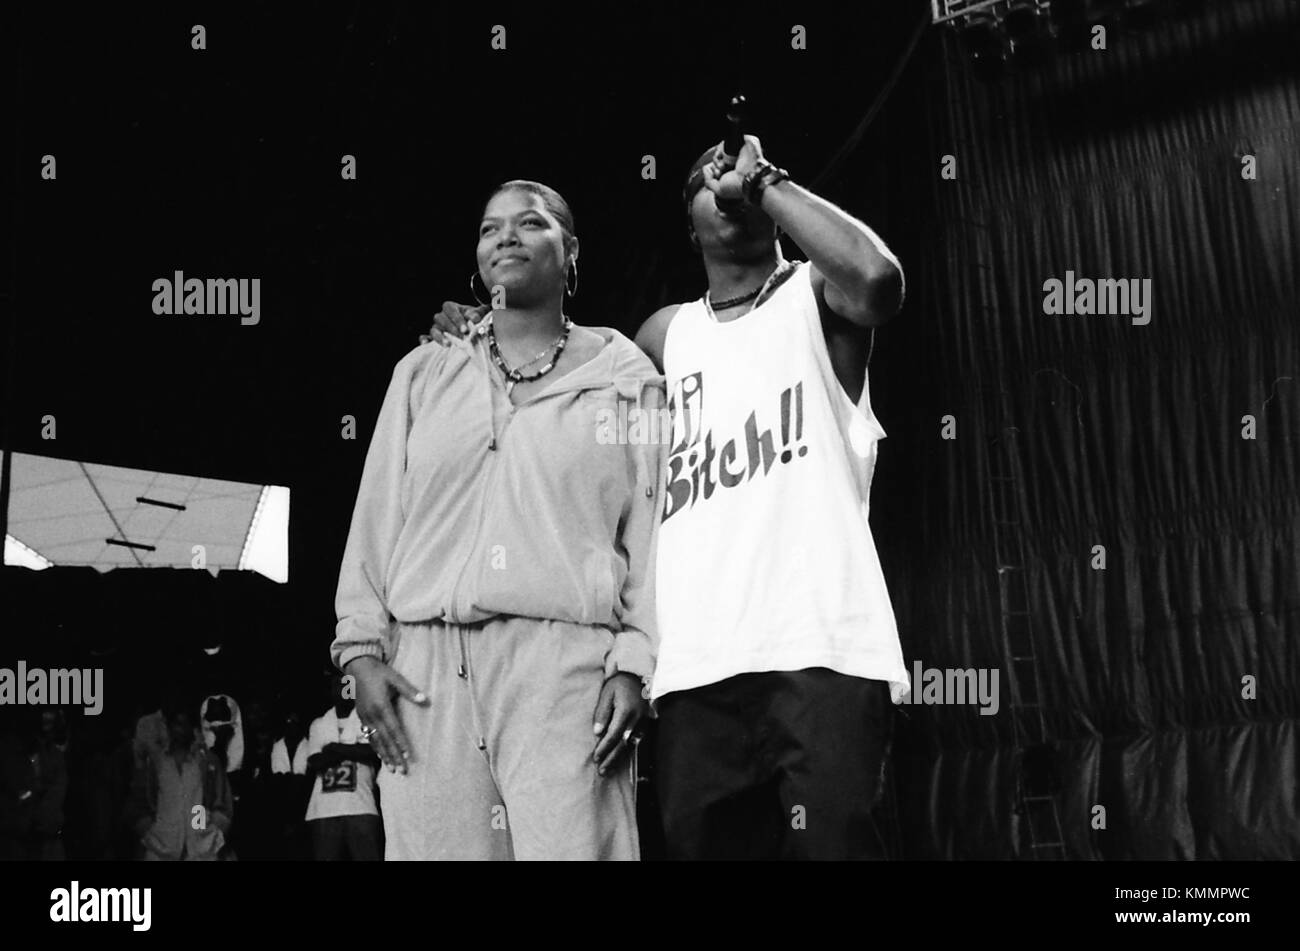 MOUNTAIN VIEW, CA - AUGUST 2: Queen Latifah and Treach of Naughty By Nature at KMEL Summer Jam 1992 at Shoreline Amphitheatre on August 2, 1992 in Mountain View, California. Credit: Pat Johnson/MediaPunch Stock Photo